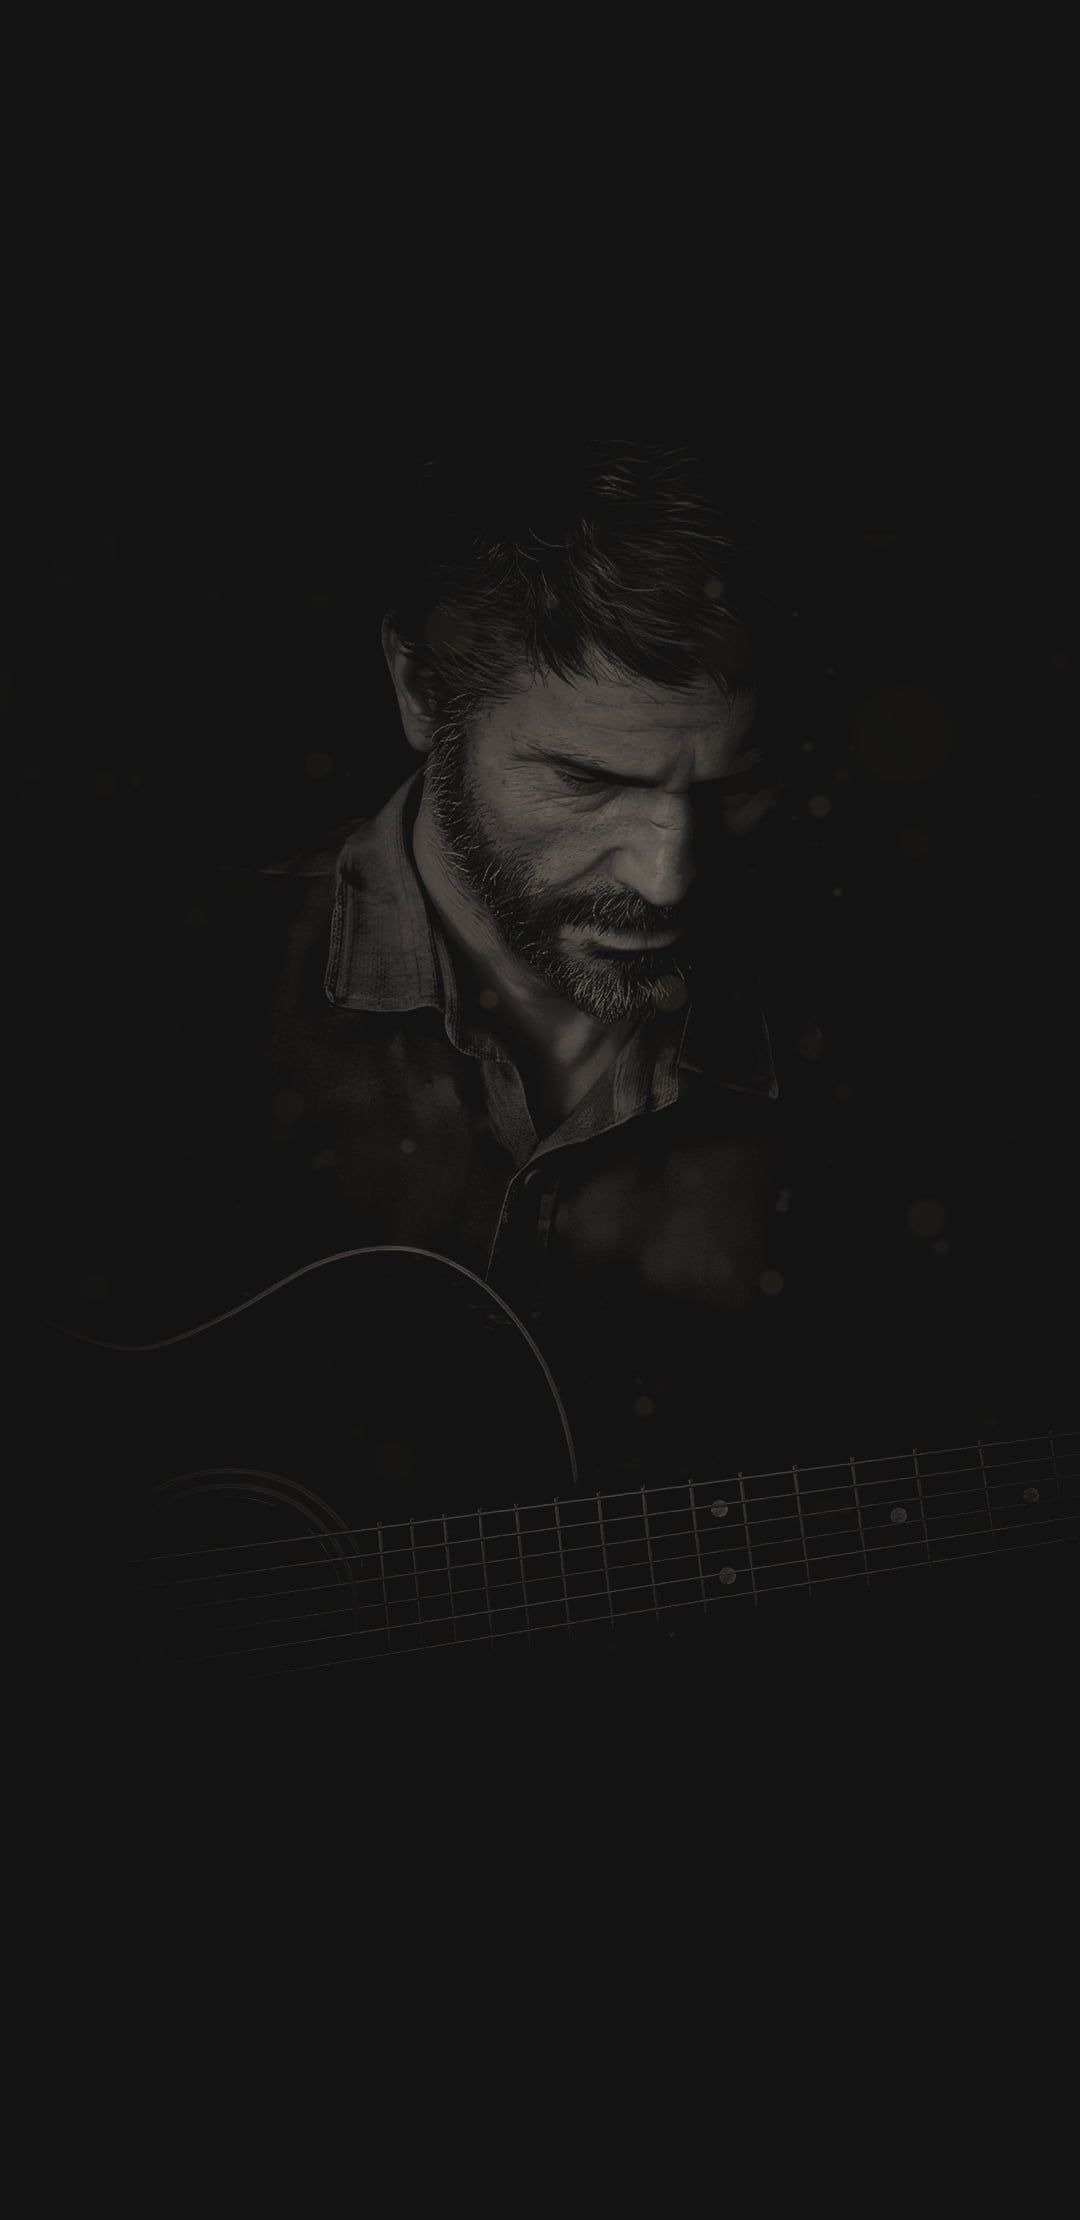 The Last Of Us Wallpaper 4k APK for Android Download